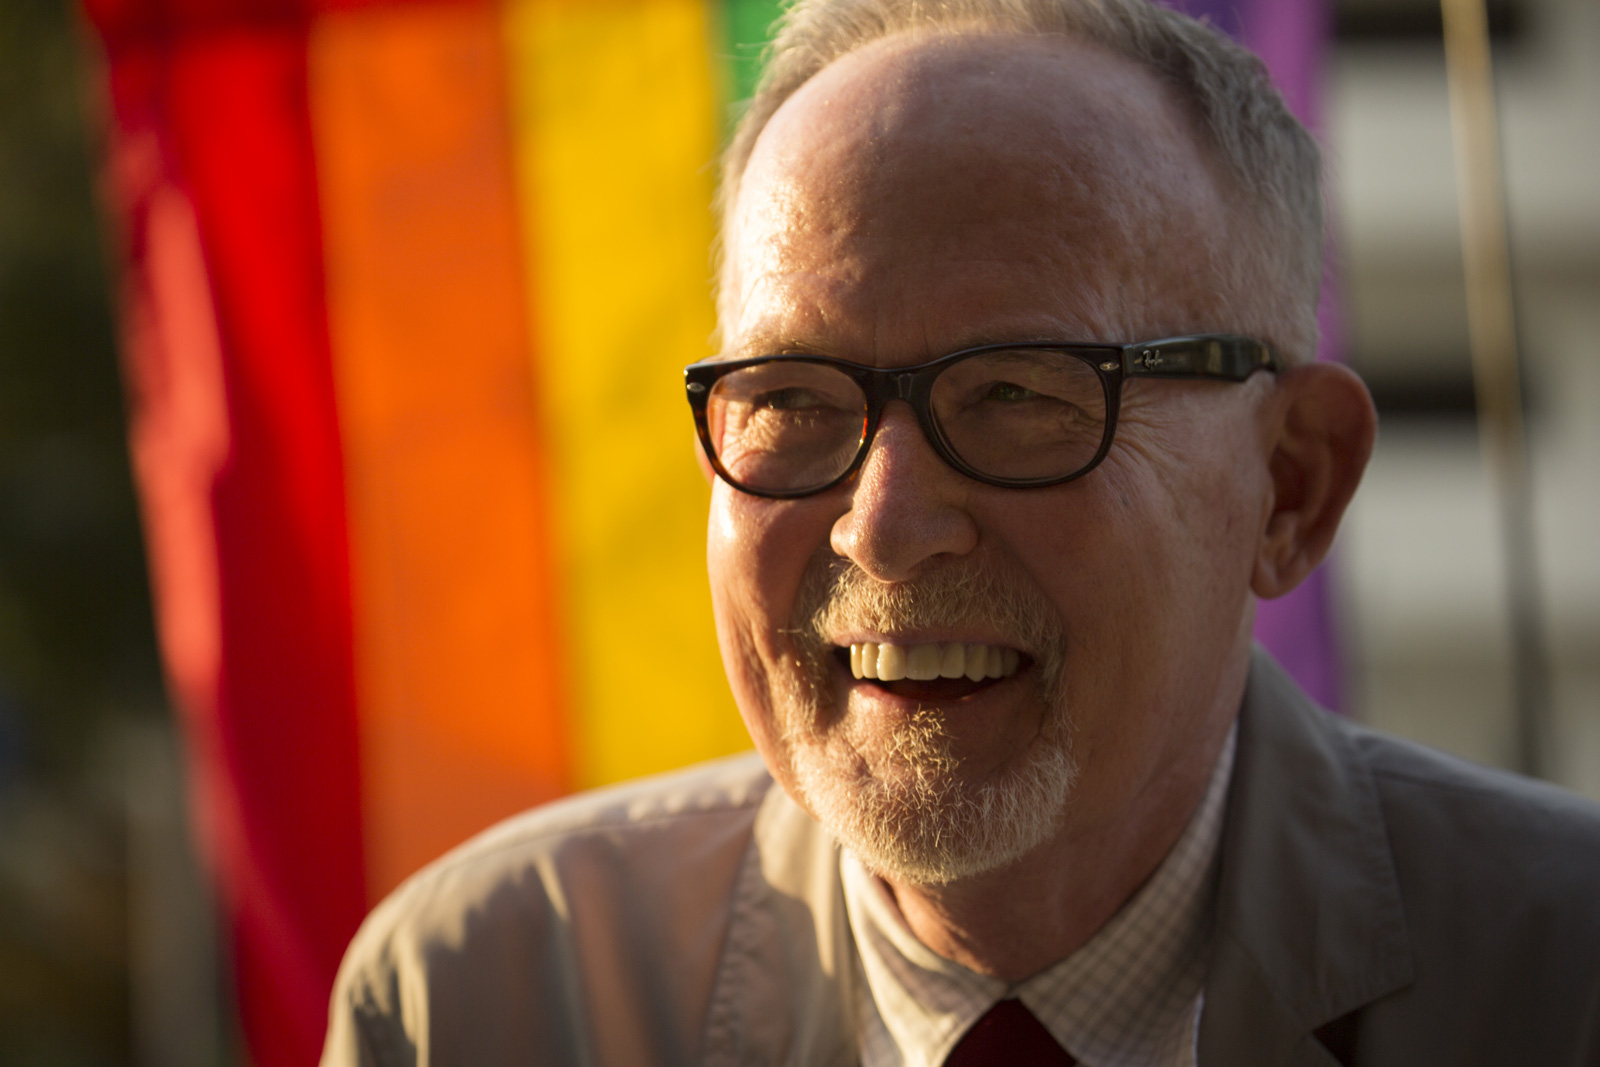 John D. Ibson, professor of American studies and cofounder of the queer studies minor, accepts the inaugural Harvey Milk Day “Ho